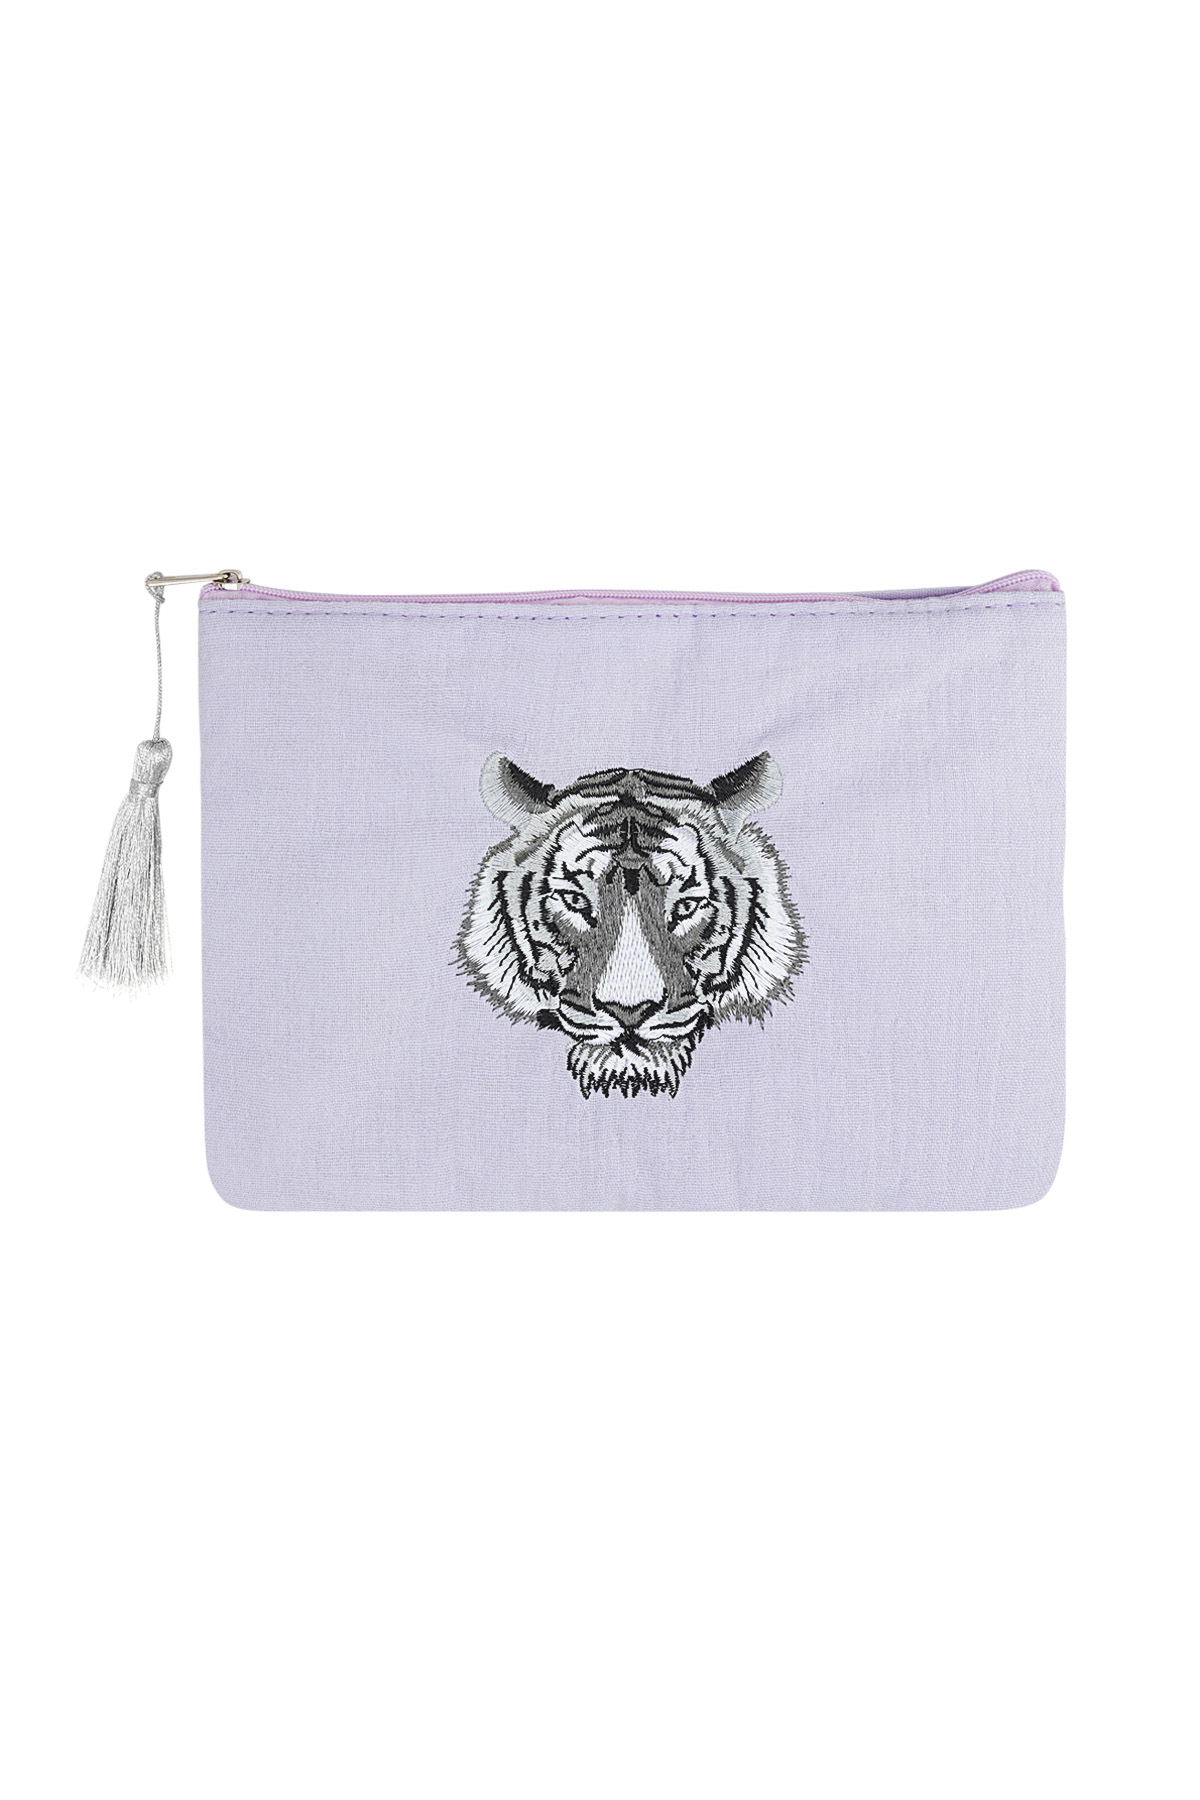 Make-up bag with tiger head - lilac h5 